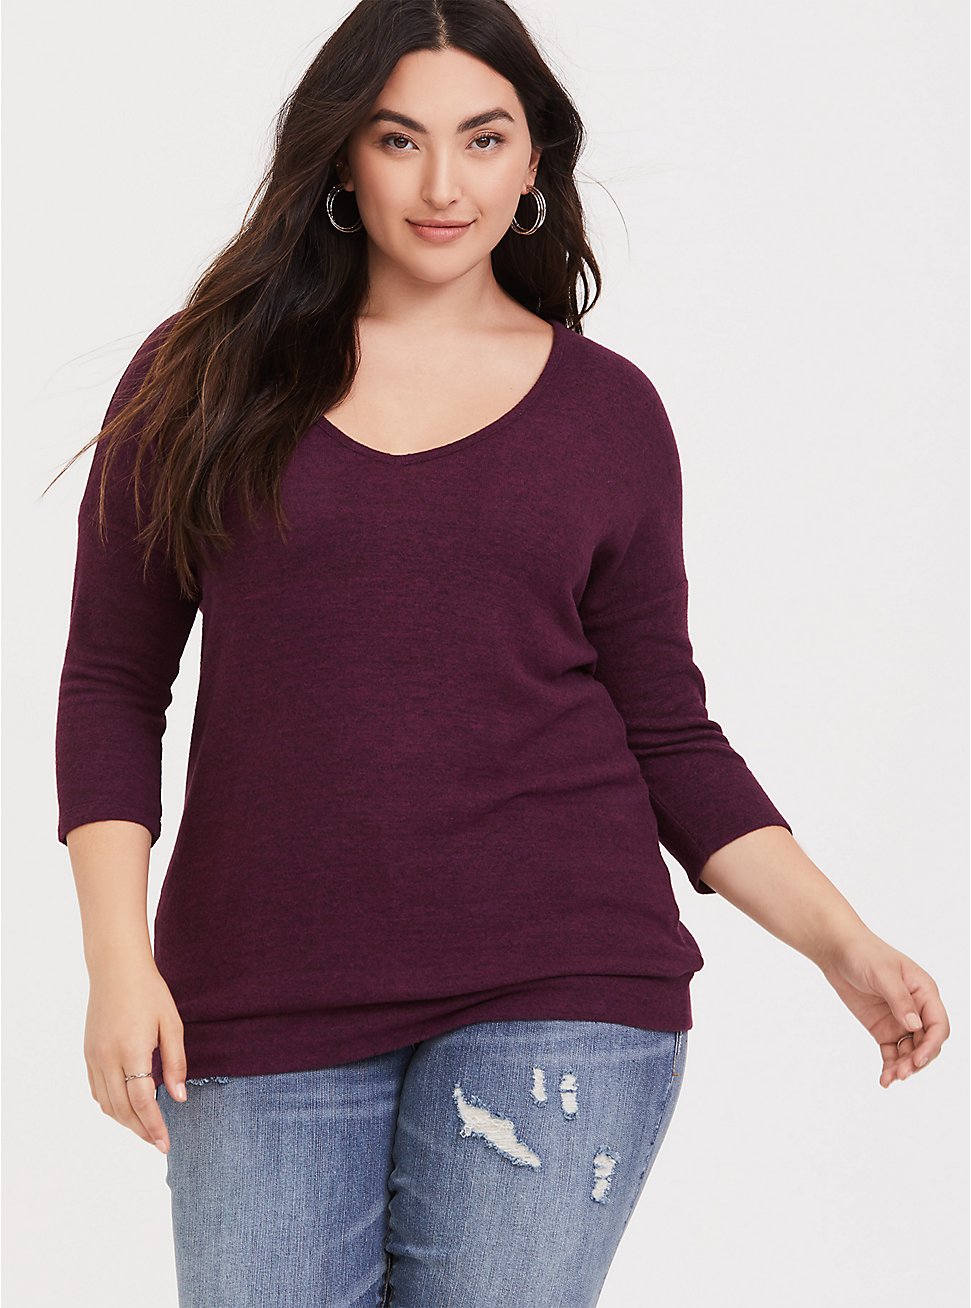 Plus Size - Burgundy Purple Brushed Hacci Dolman Pullover Sweater Top ...